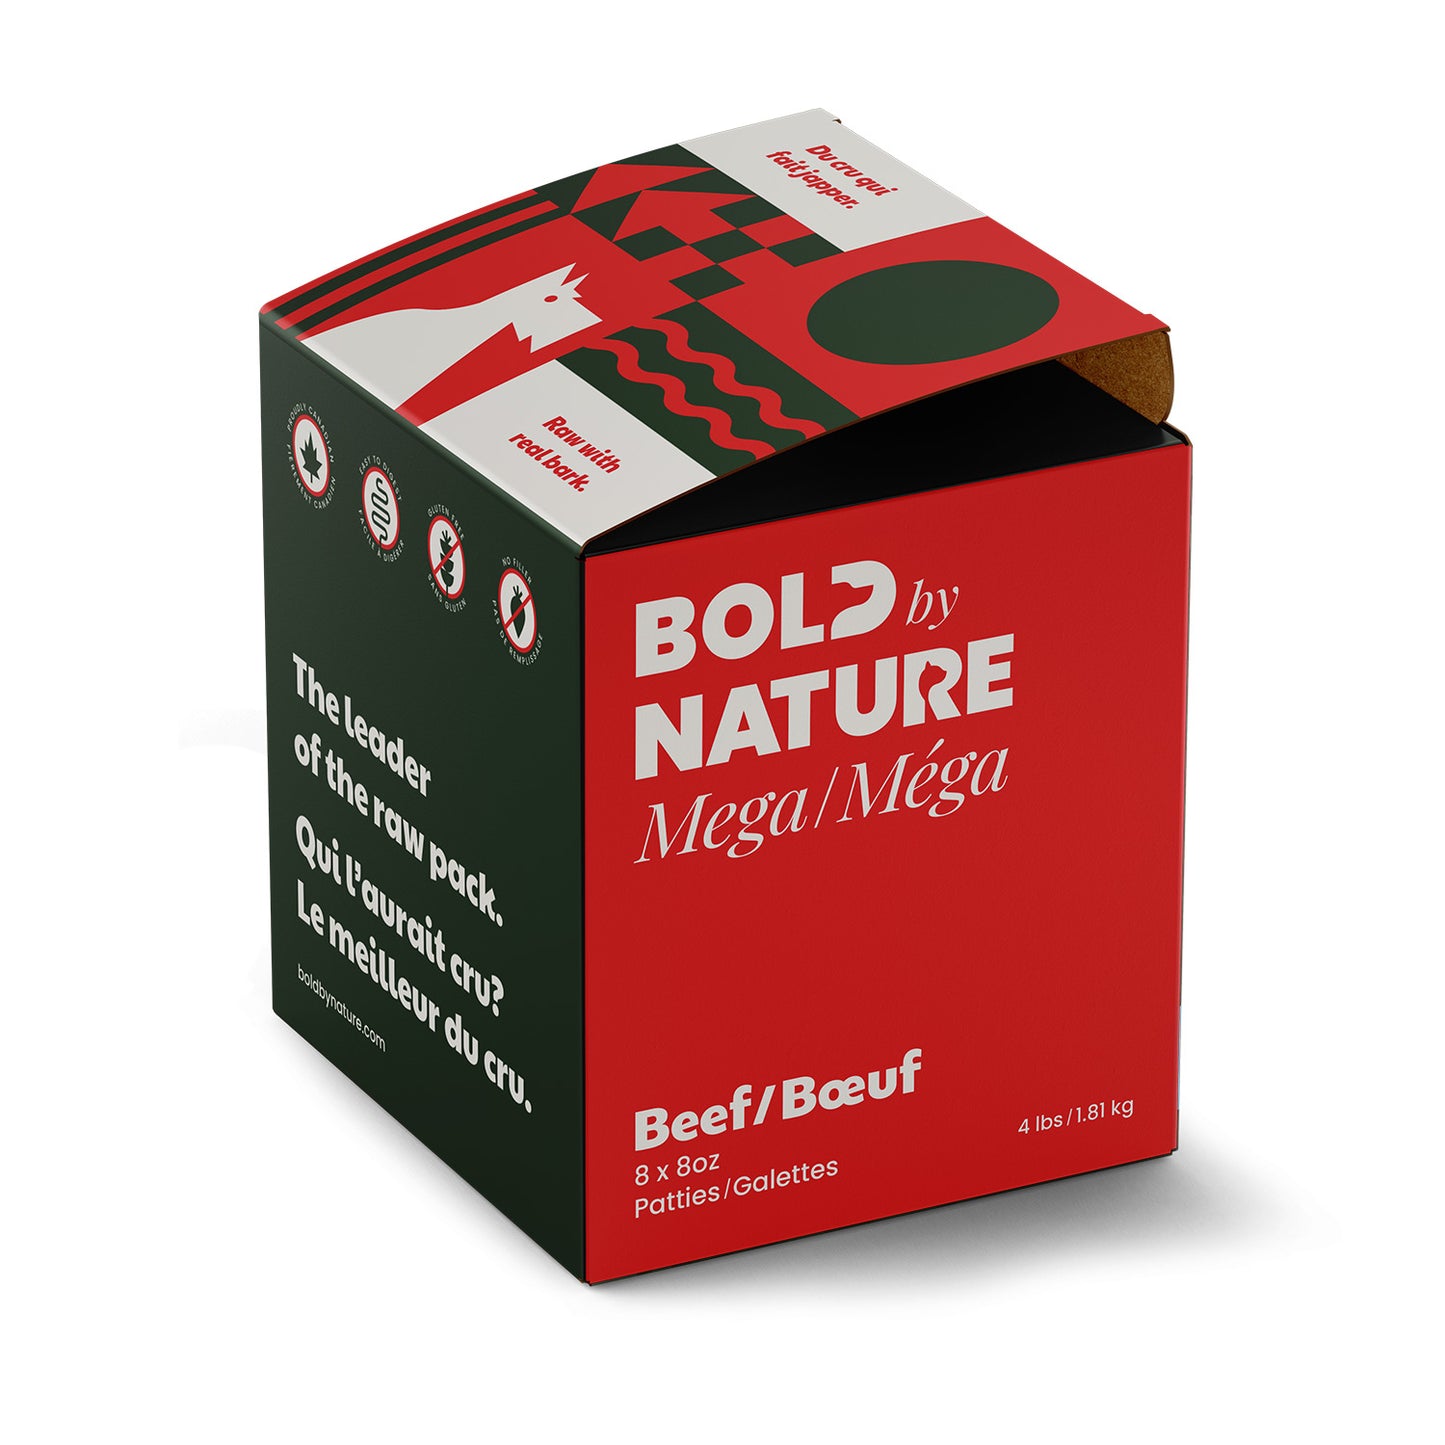 Bold By Nature Mega Dog Raw Beef Dinner 4lb Patties